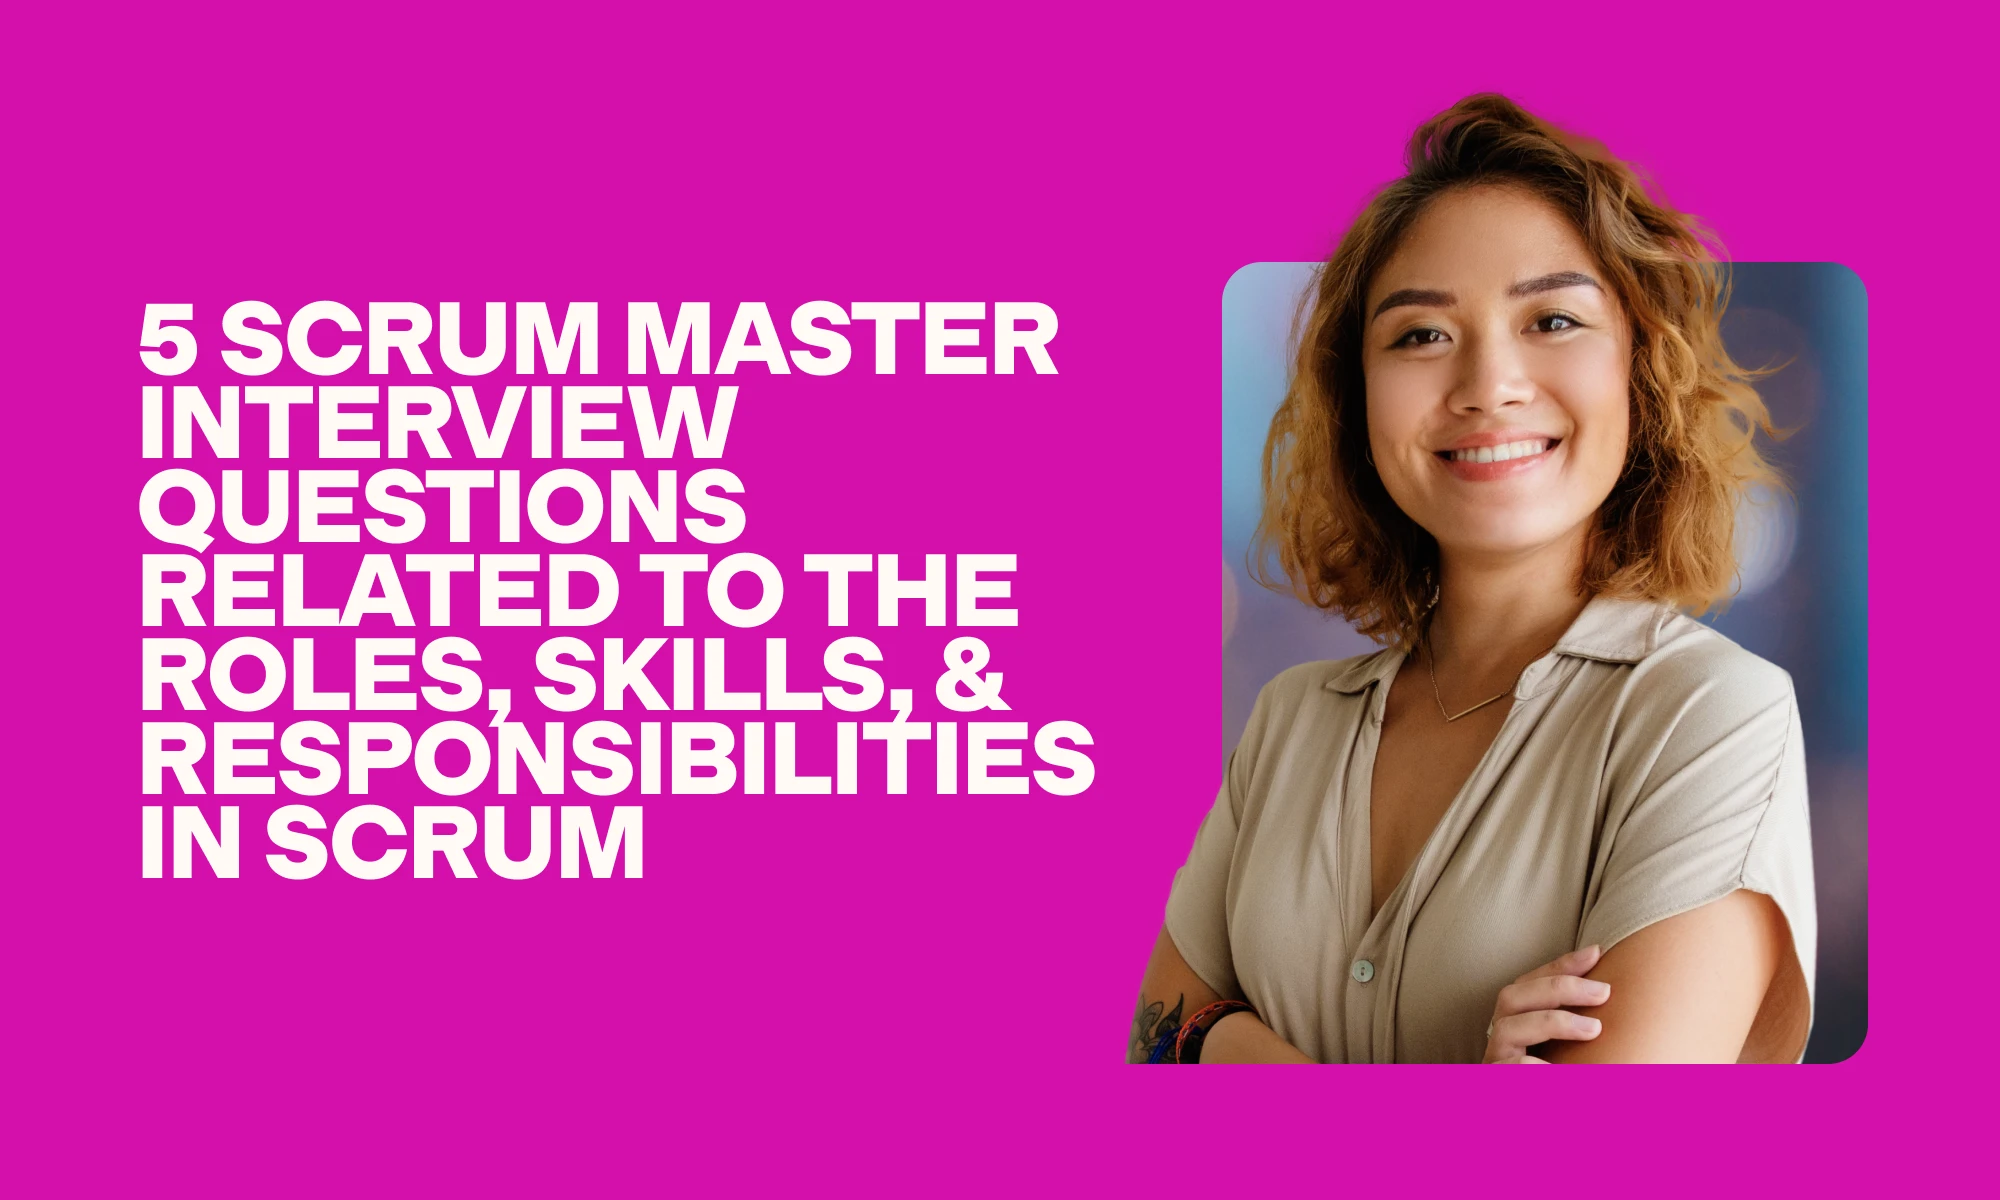 Scrum Master interview questions related to the roles, skills, and responsibilities in Scrum